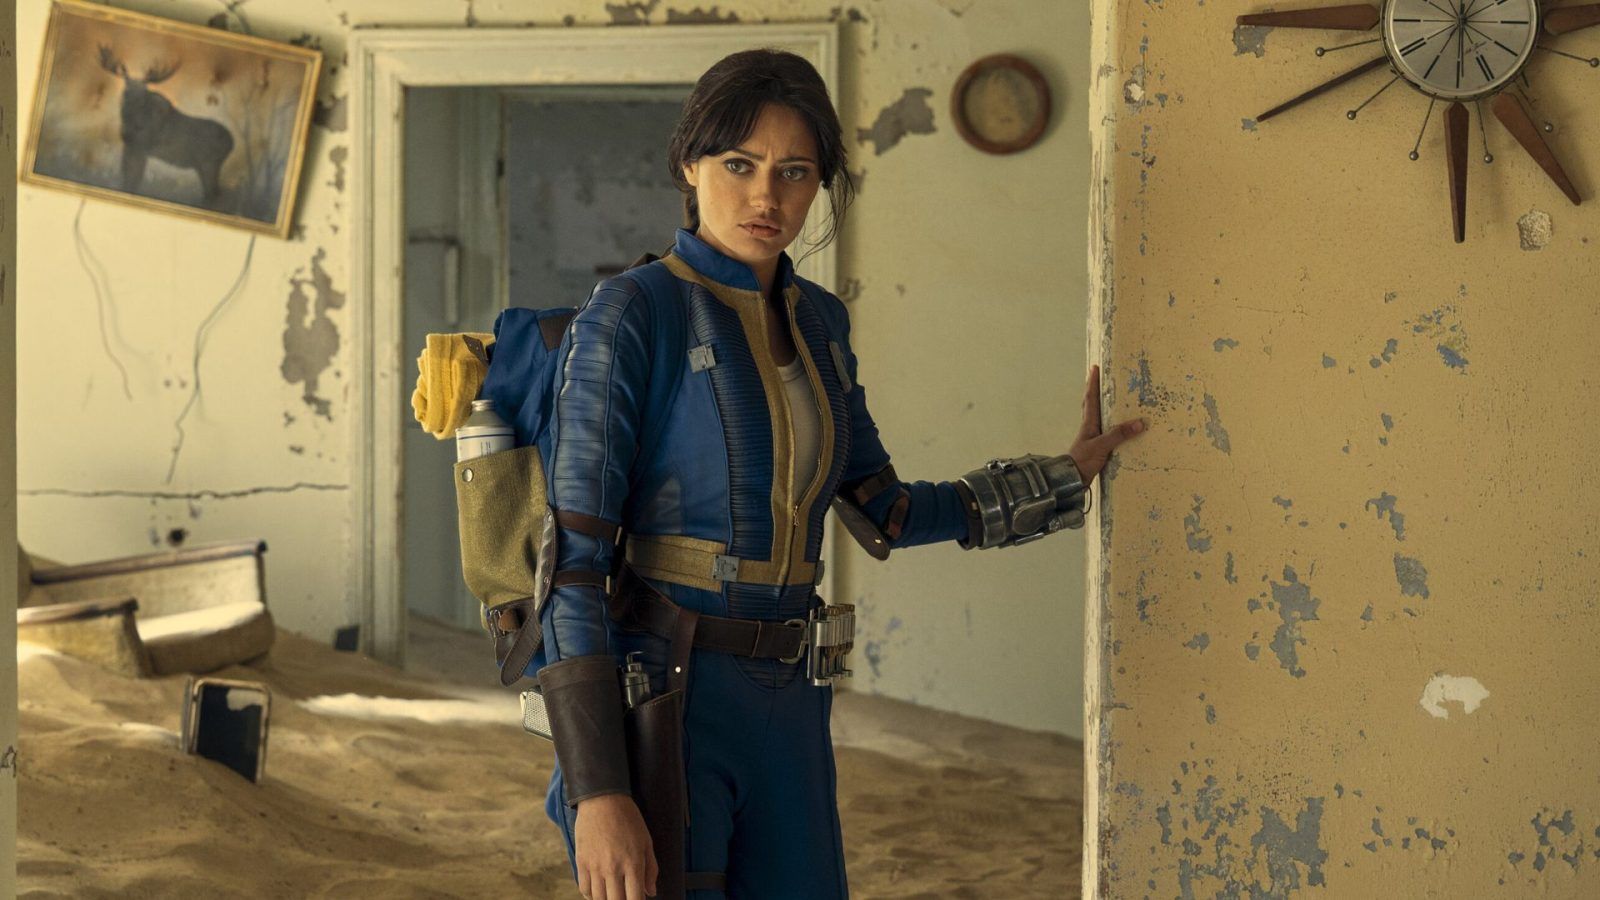 'Fallout' TV show ending explained What's next for Lucy & Maximus?